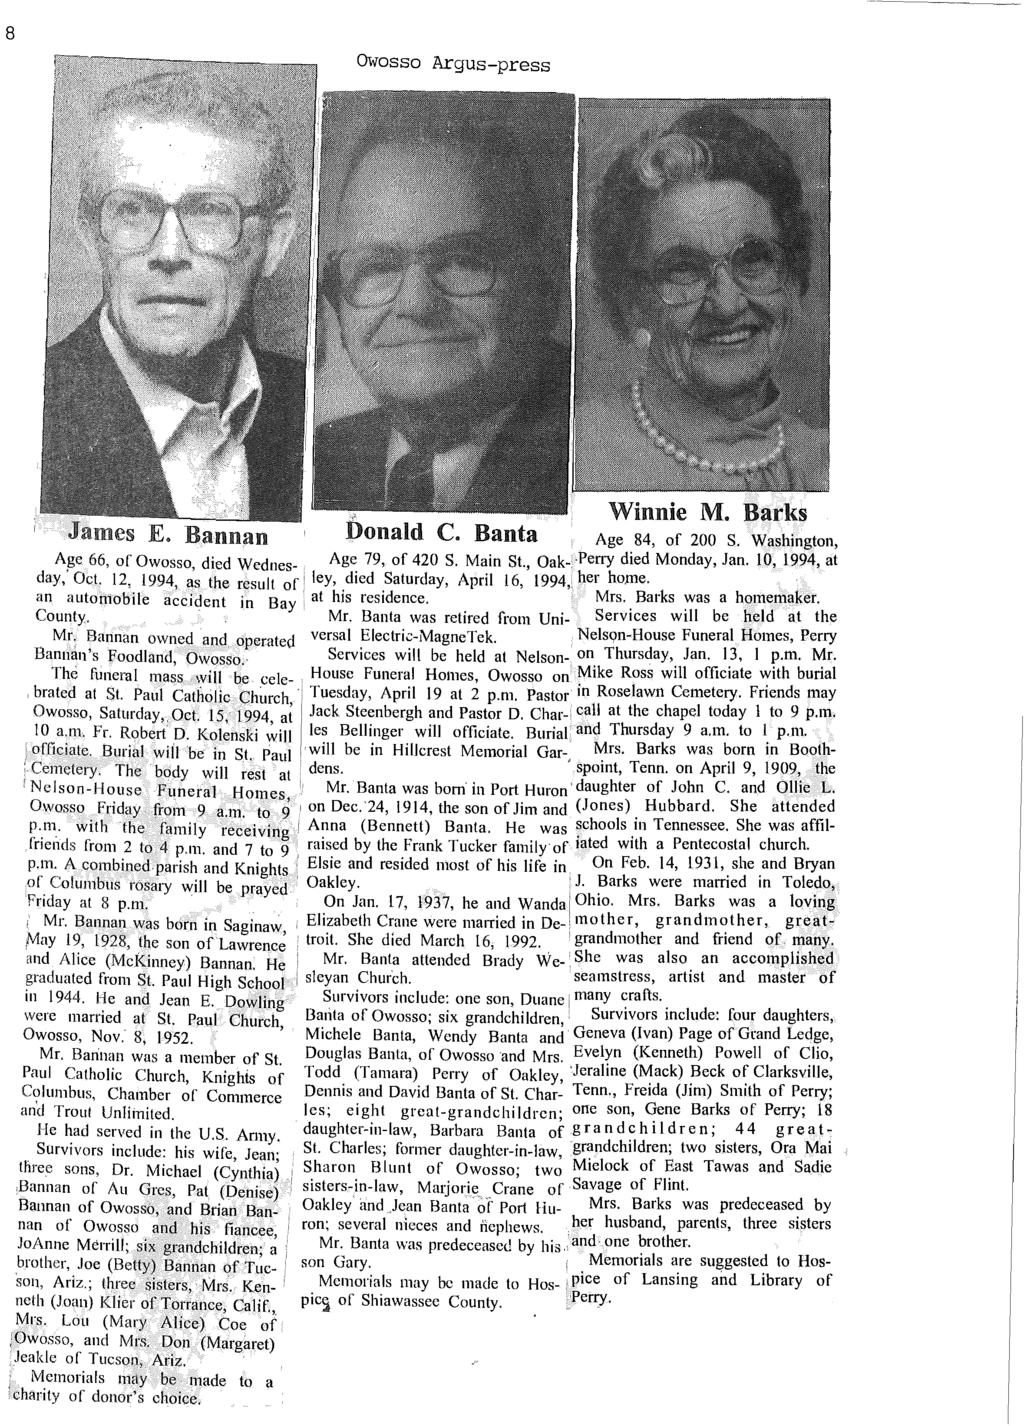 8 Owosso Argus-press James E. Bannan Donald C. Banta Age 84, of 200 S. Washington, AJ:Se 66, of Owosso, died Wednes- Age 79,. of 420 S. Main St., Oak- Perry died Monday, Jan. 10, 1994, at day, Oct.